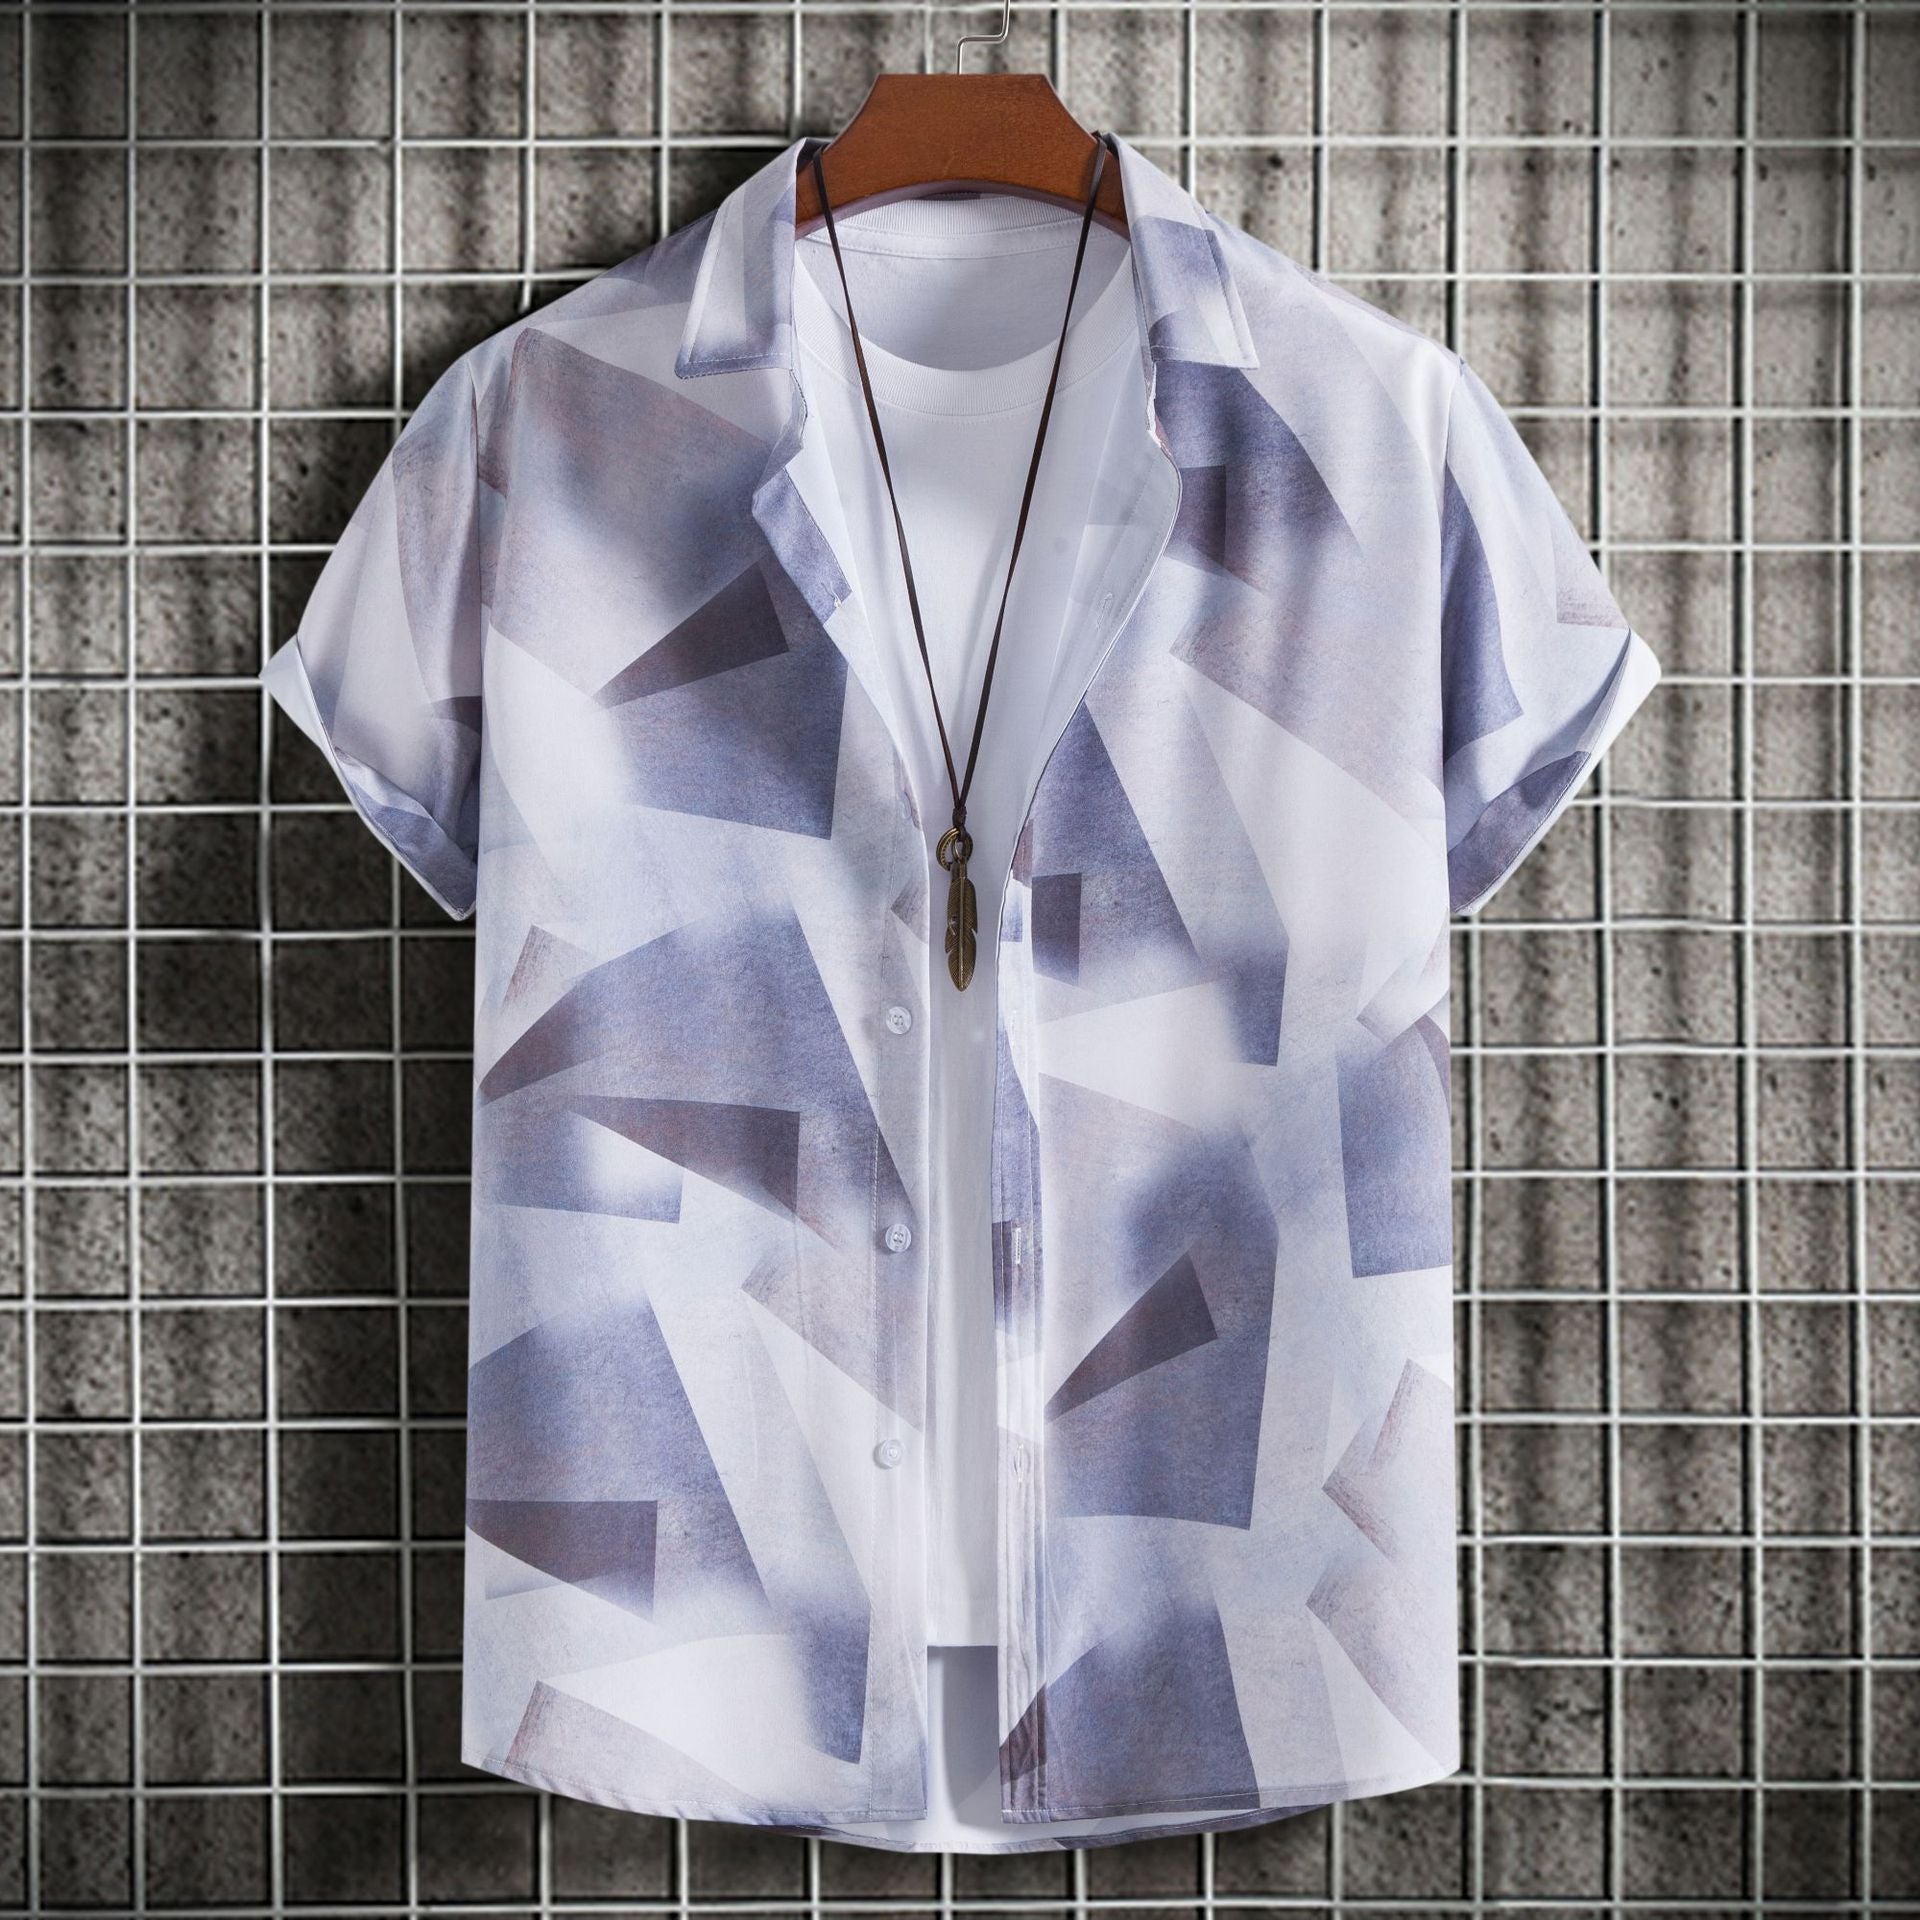 C227 - Men's Fashion Slim-fit Printed Short Sleeve Button Up Shirts - mens button up shirt at TFC&H Co.